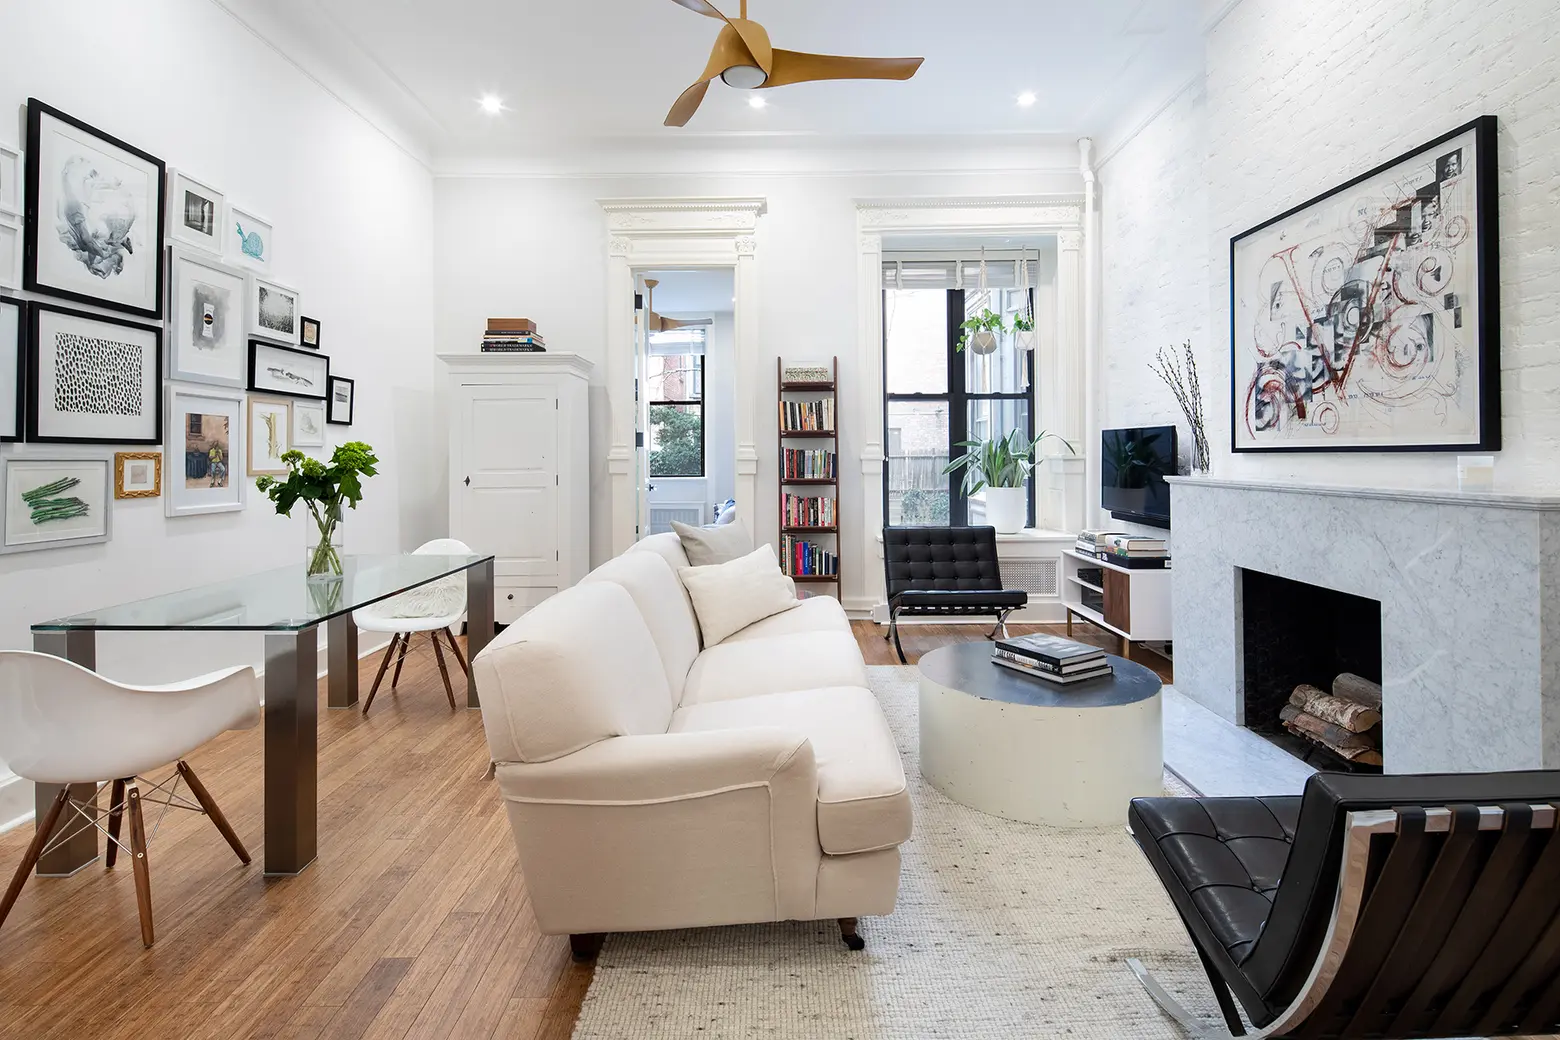 For $1.4M, this Upper West Side two-bedroom blends old-world charm with sleek, modern lines